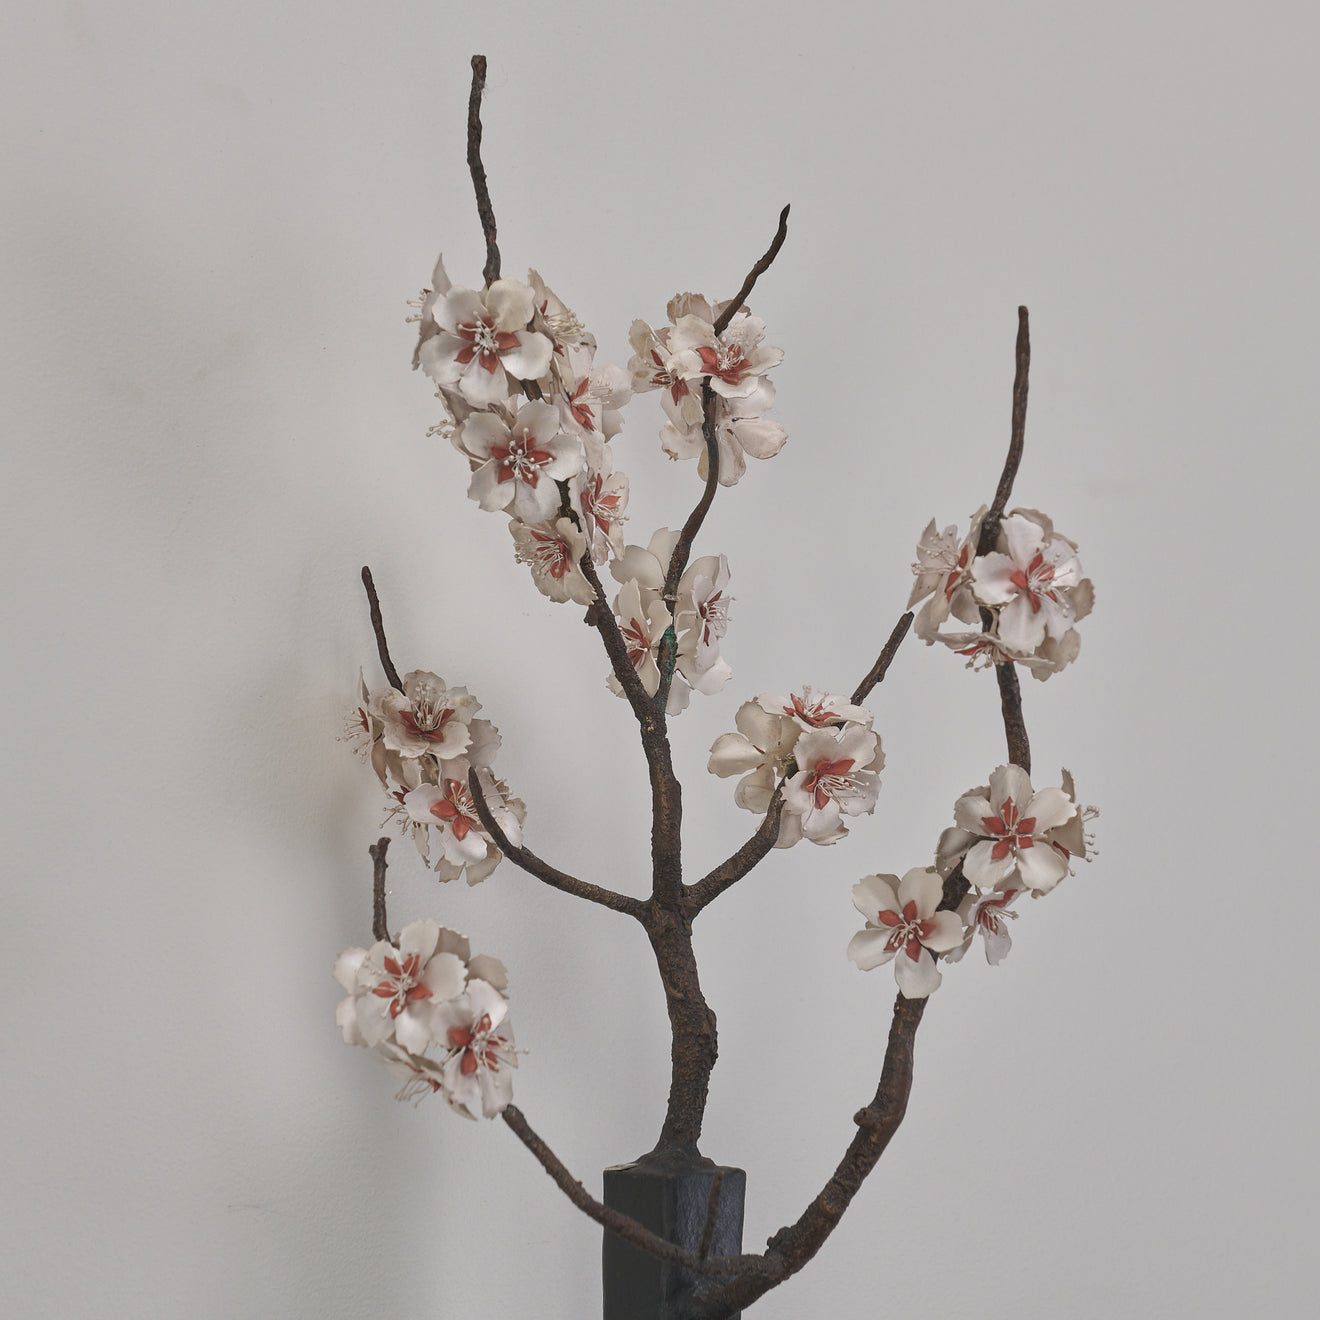 AARON'S ROD WITH ALMOND BLOSSOMS BY DIANE TINTOR